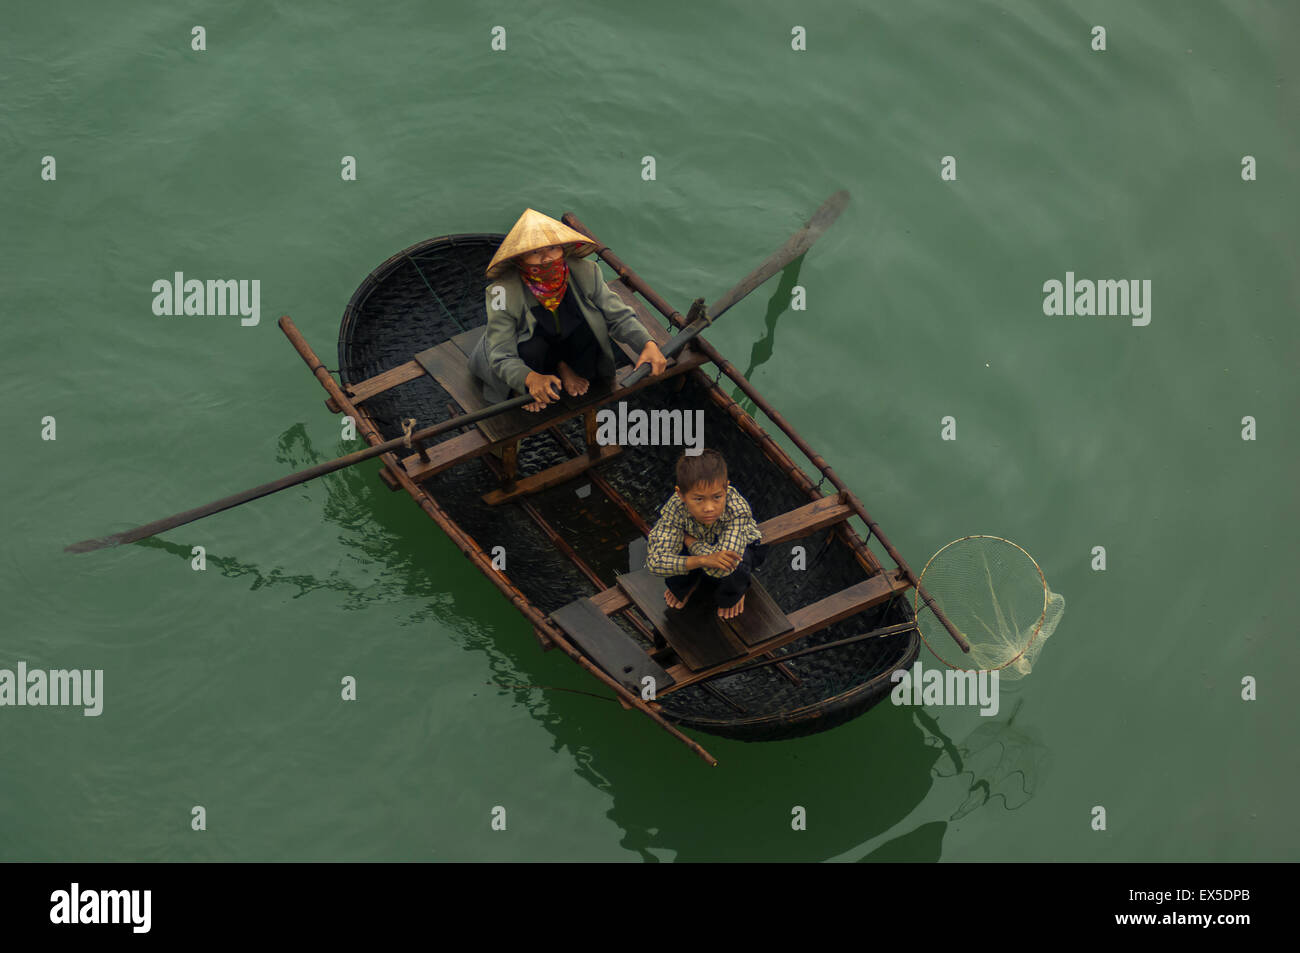 Vietnamese woman and child in rowing boat selling wares Stock Photo